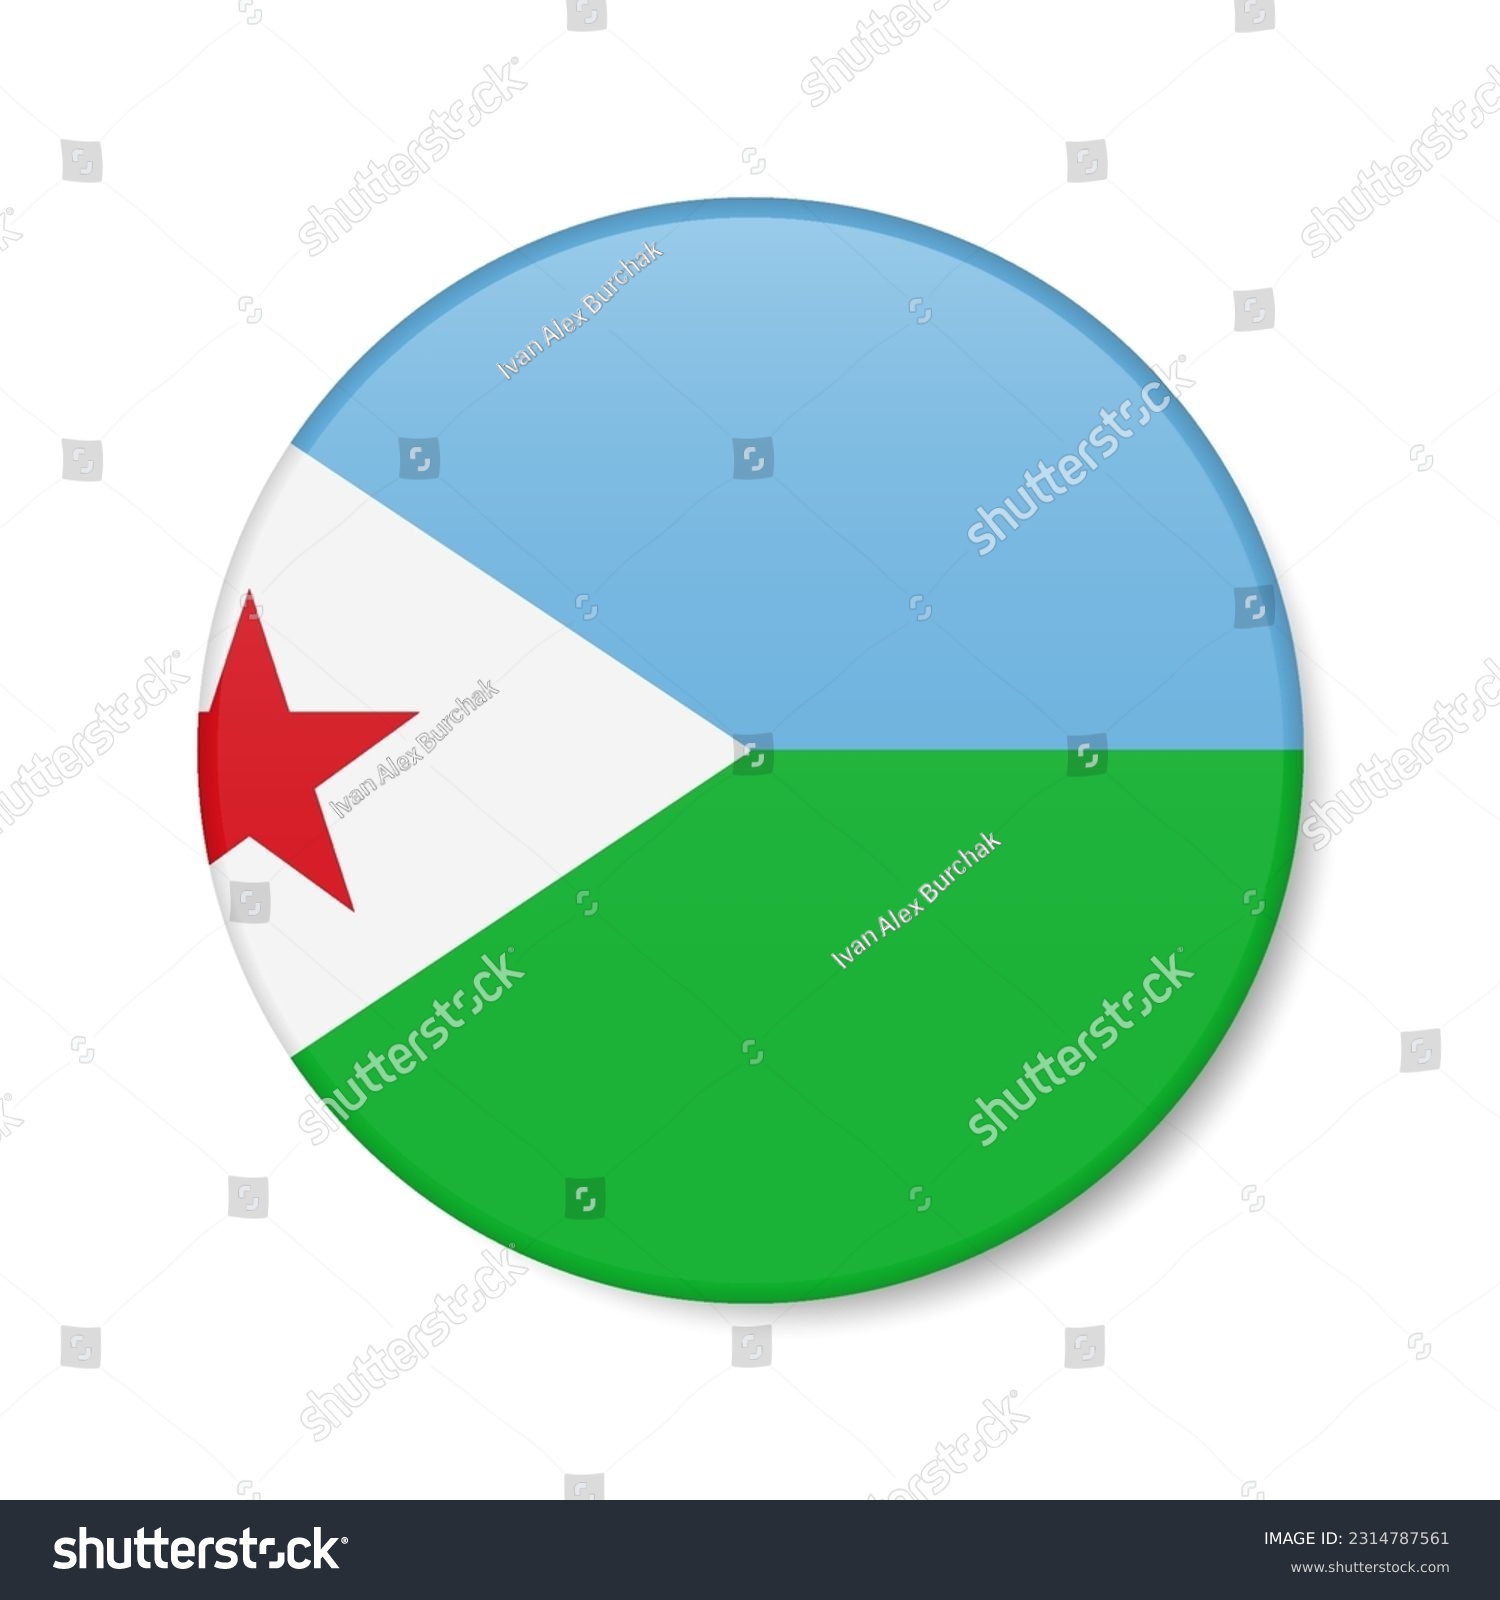 SVG of Djibouti circle button icon. Djiboutian round badge flag with shadow. 3D realistic vector illustration isolated on white. svg